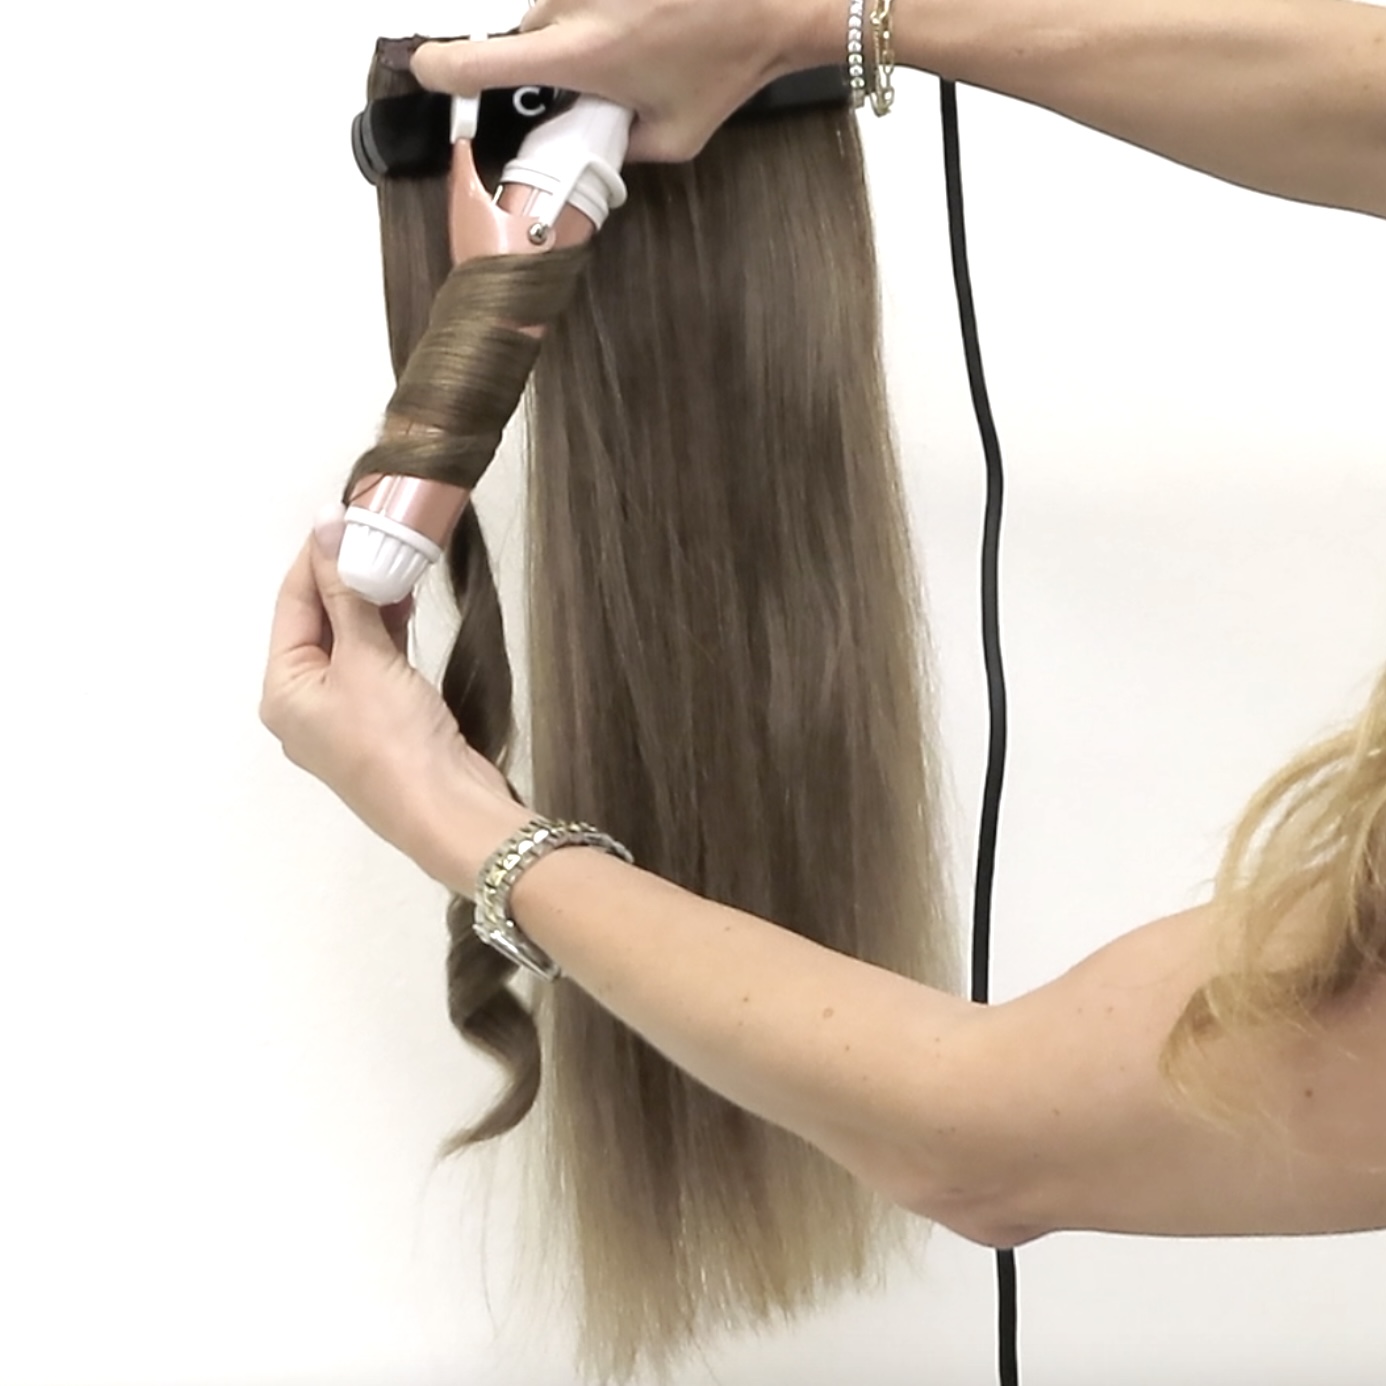 wrapping cashmere hair extensions around a pink curling iron